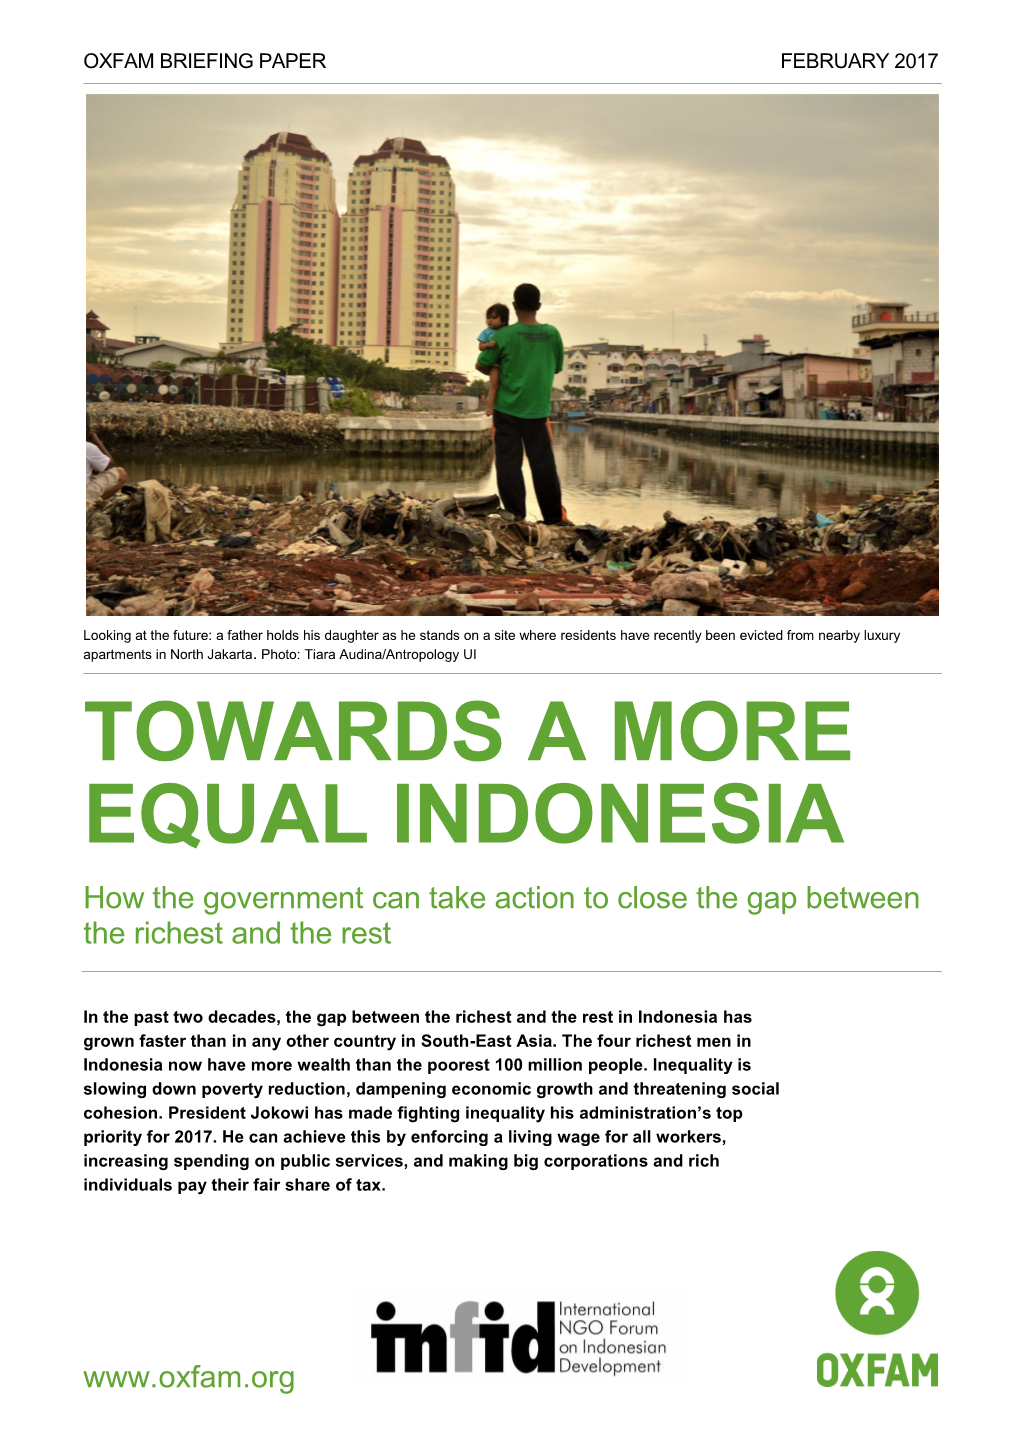 TOWARDS a MORE EQUAL INDONESIA How the Government Can Take Action to Close the Gap Between the Richest and the Rest